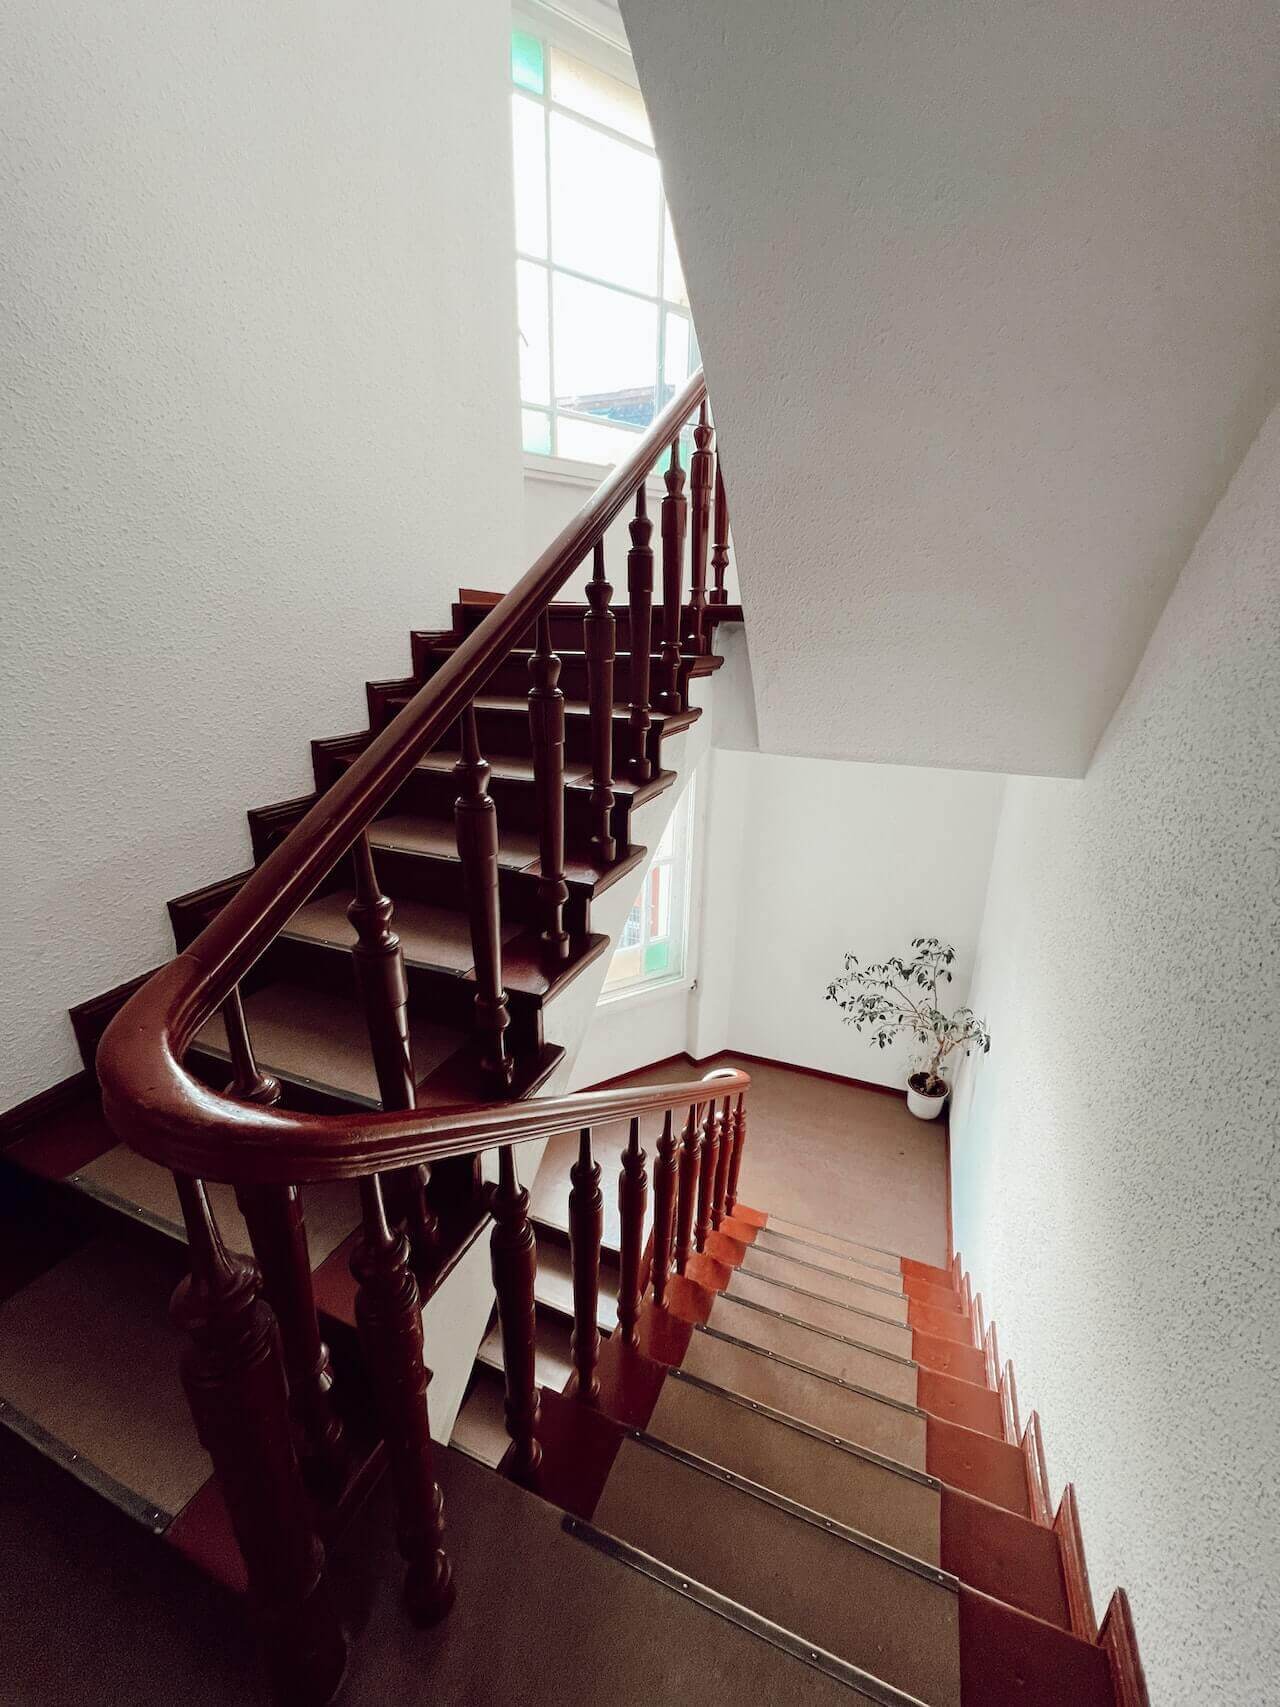 Traditional railing with wooden balusters and steps, design of railing for staircase